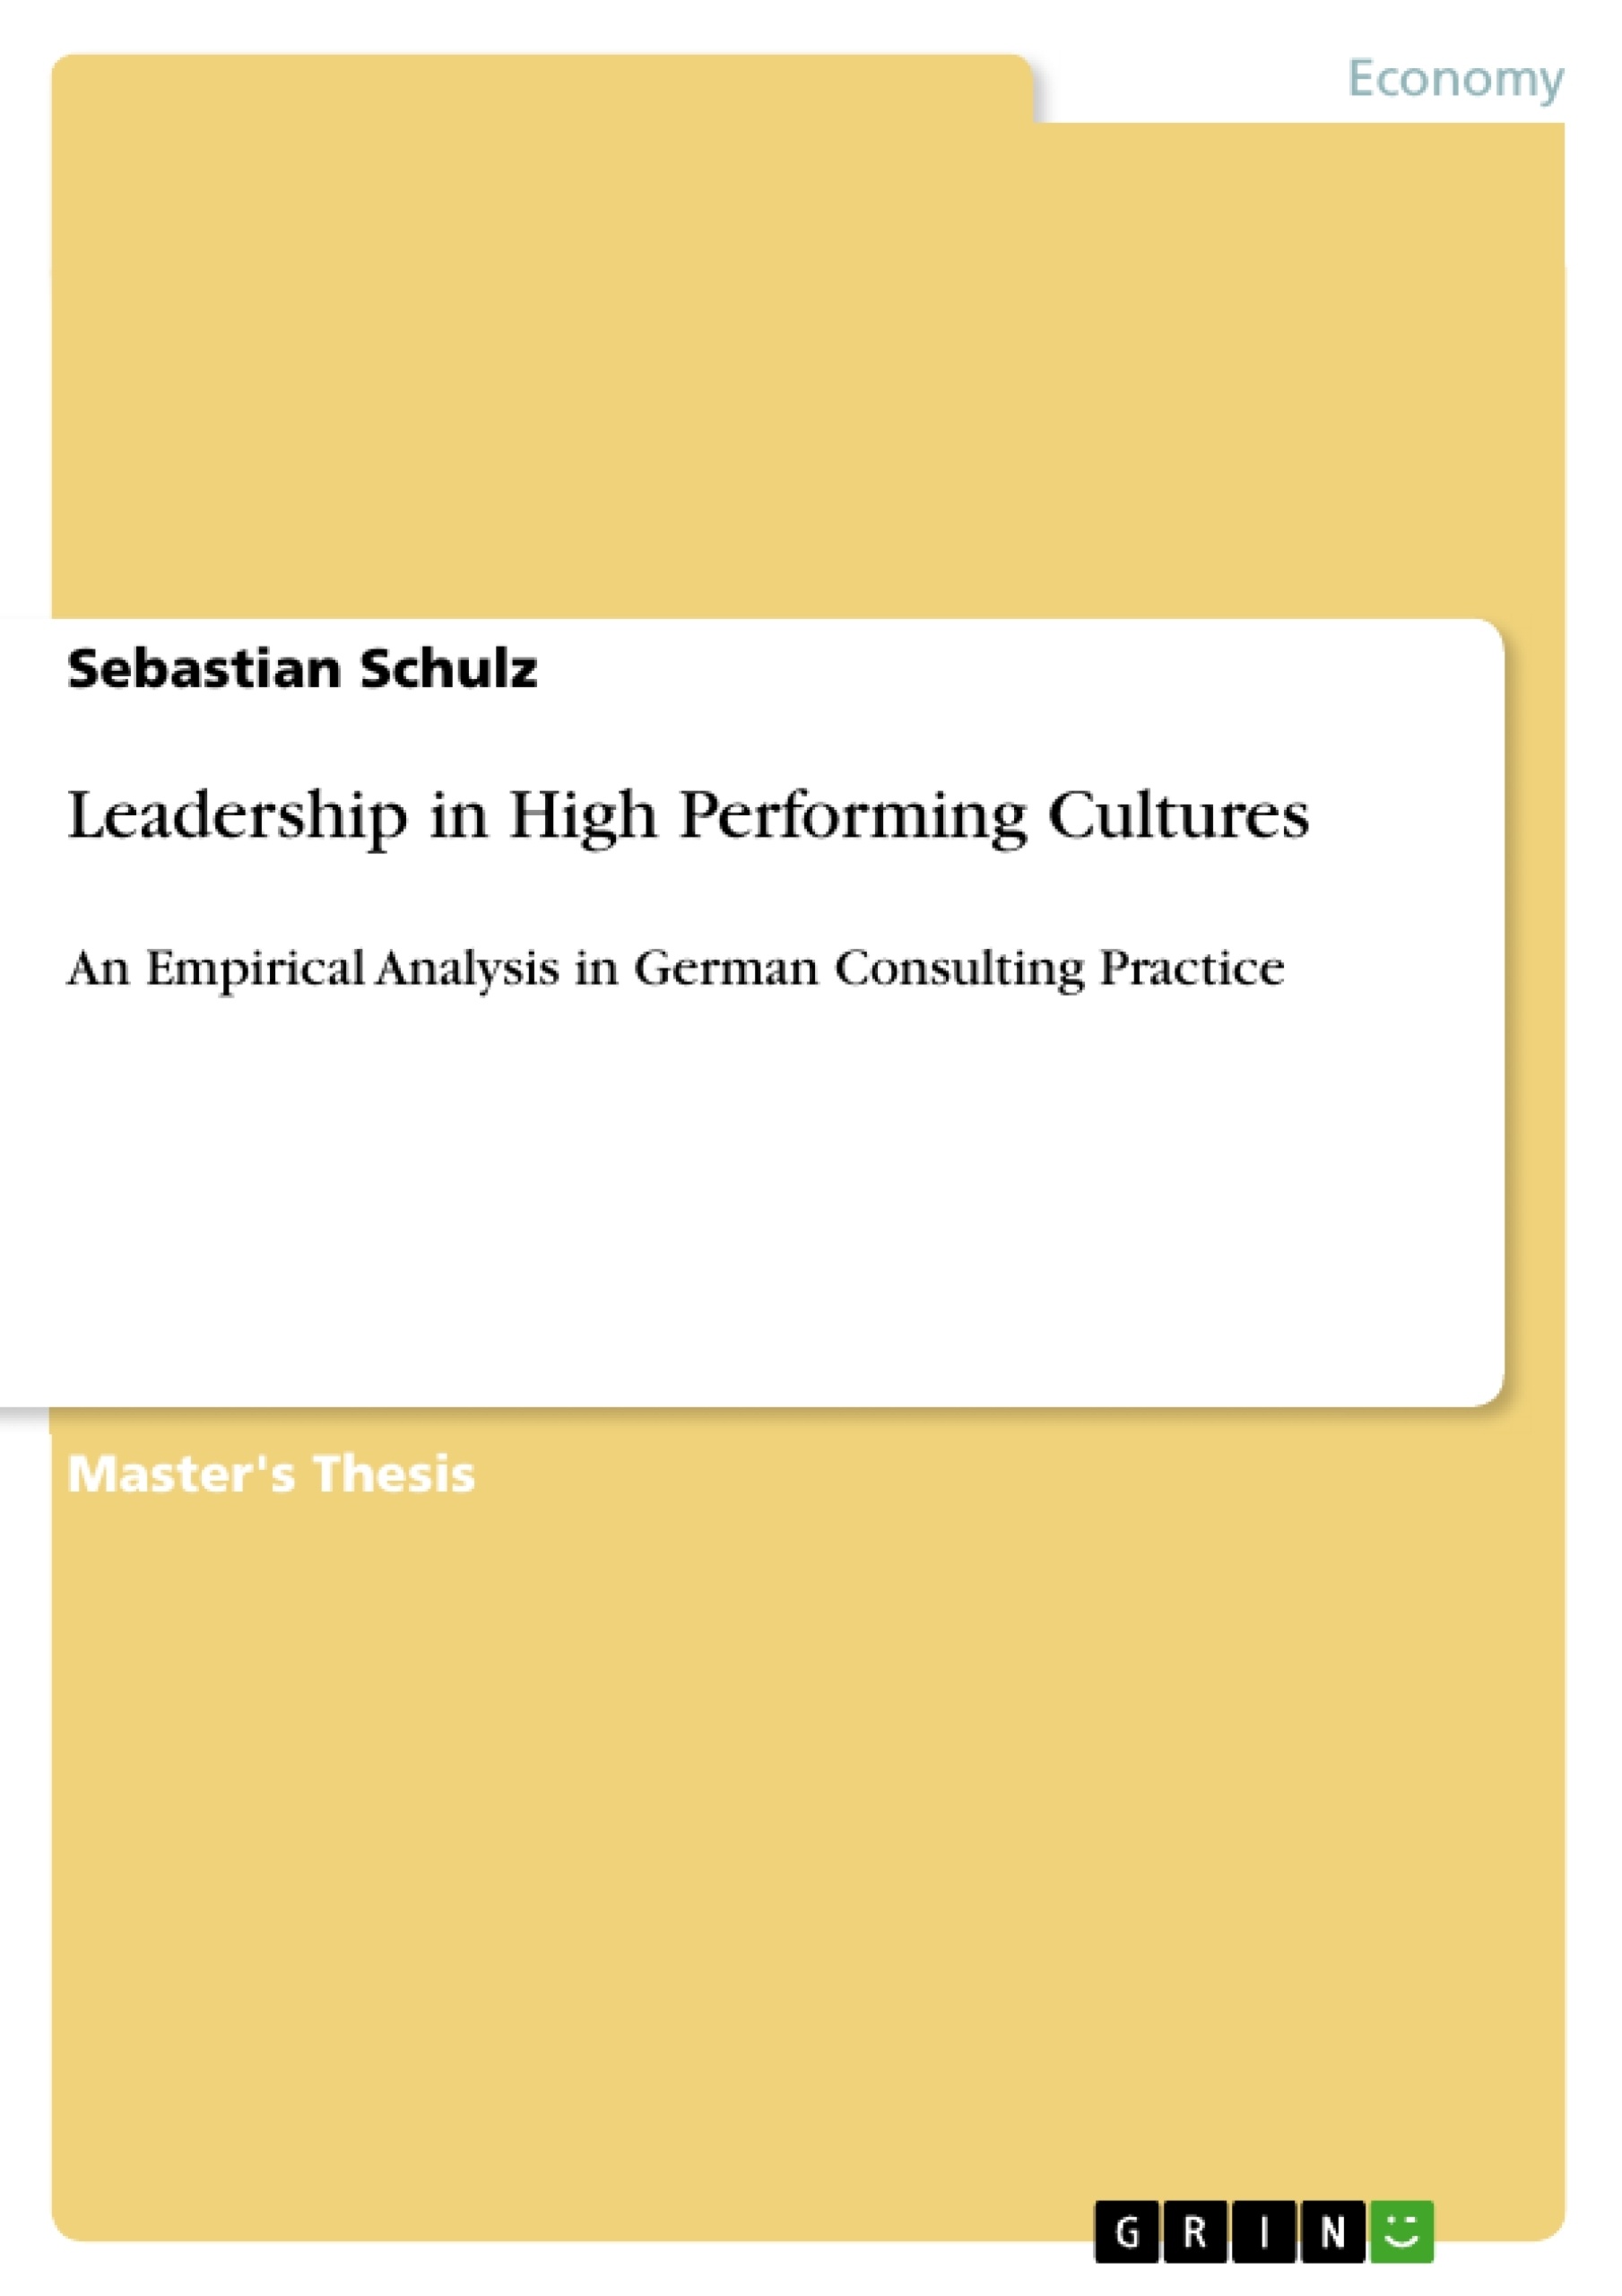 Title: Leadership in High Performing Cultures